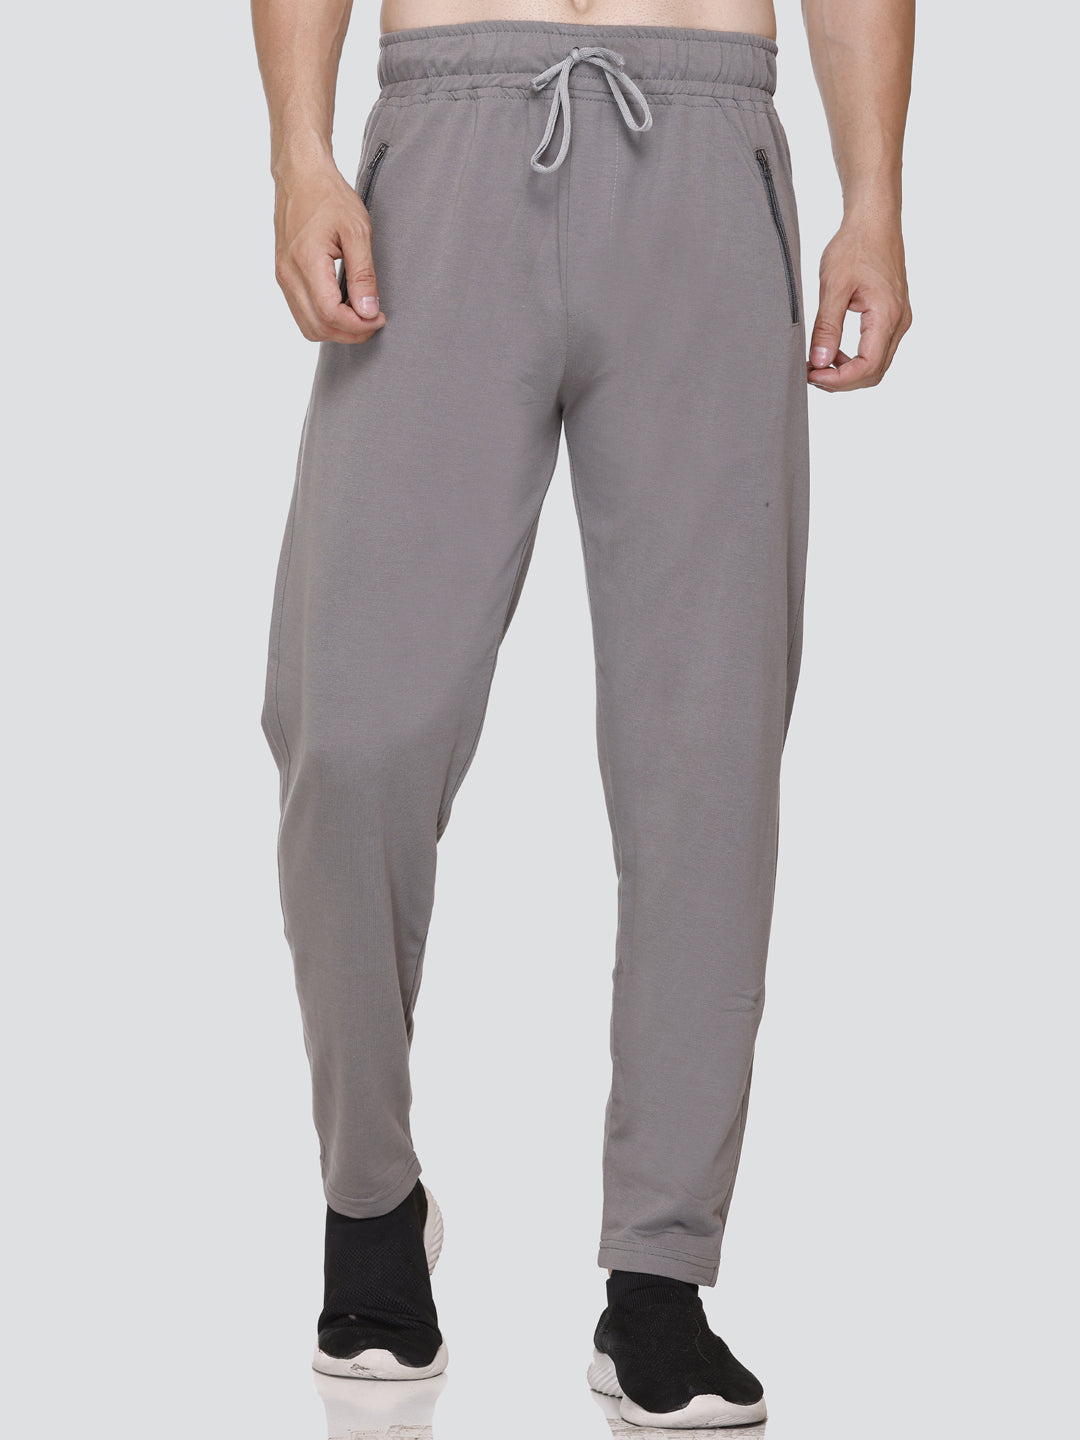 Easy 2 Wear ® Mens Track Pant (Sizes S to 4XL) (Small) Blue : Amazon.in:  Clothing & Accessories